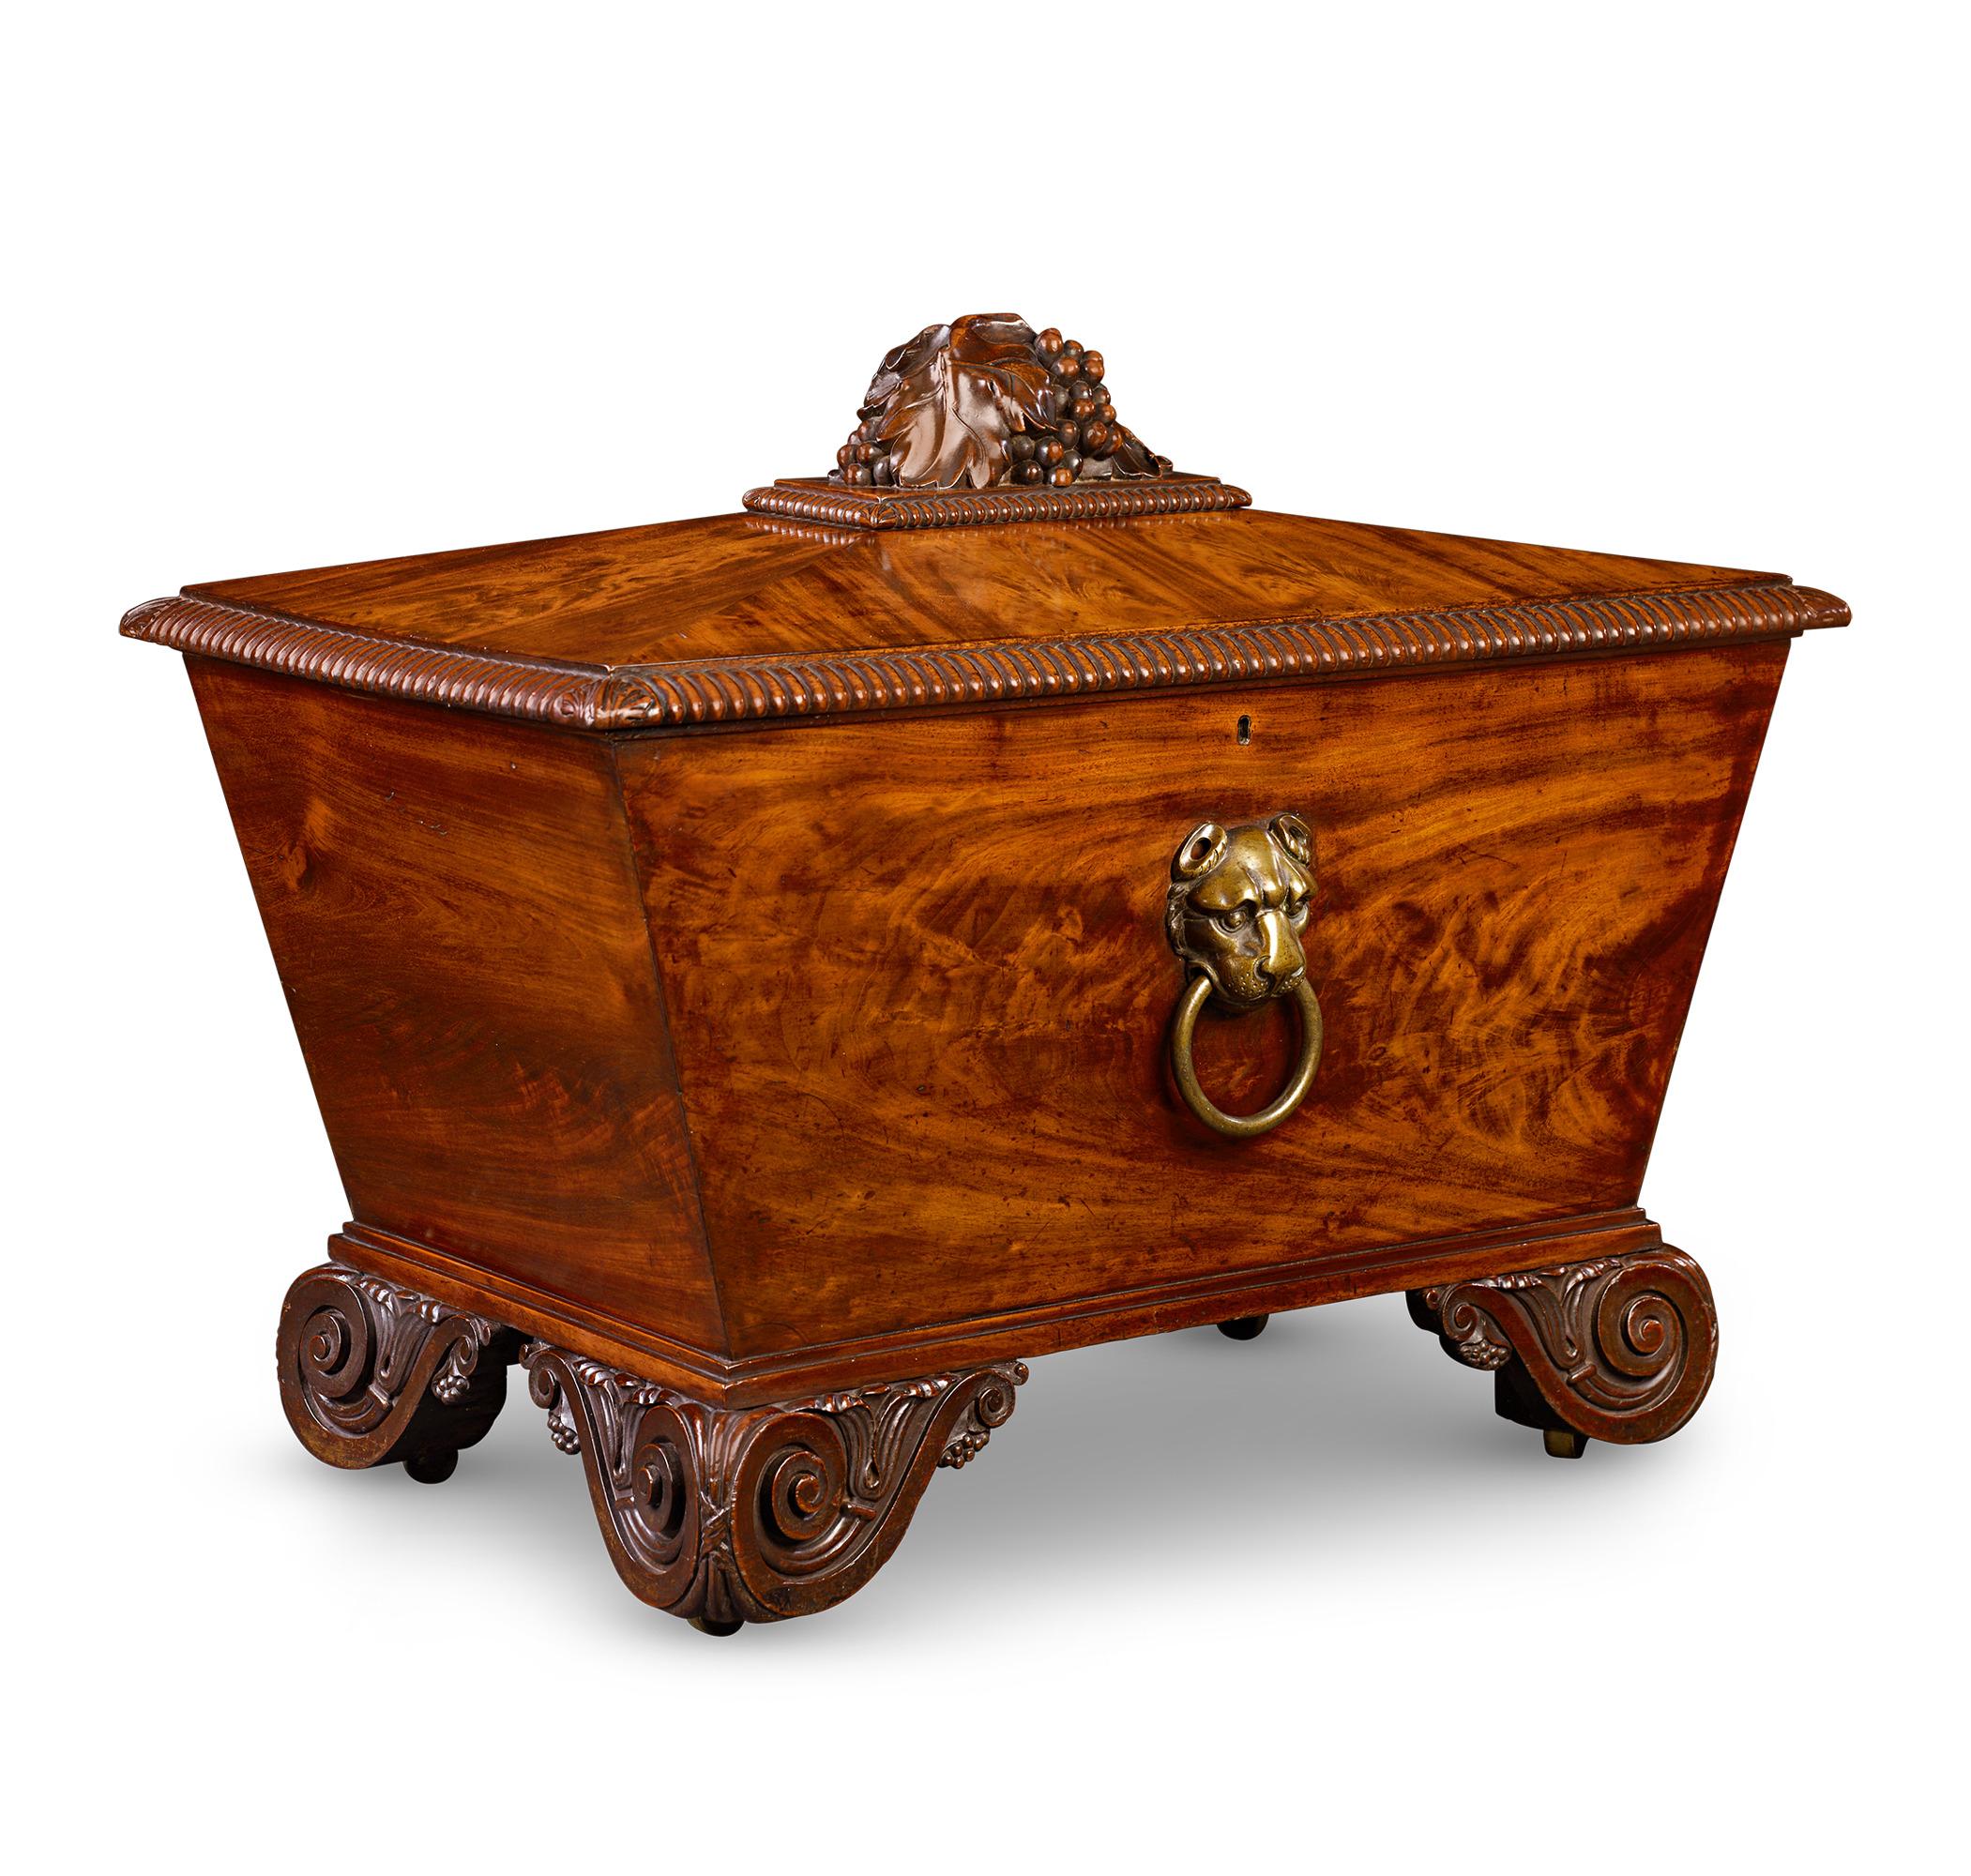 This exquisite 19th-century wine cooler is sculpted from the finest mahogany into a distinctive sarcophagus shape. The top is adorned with intricately carved grape and grape leaf motifs, framed by gadrooned borders. The piece rests on elegantly